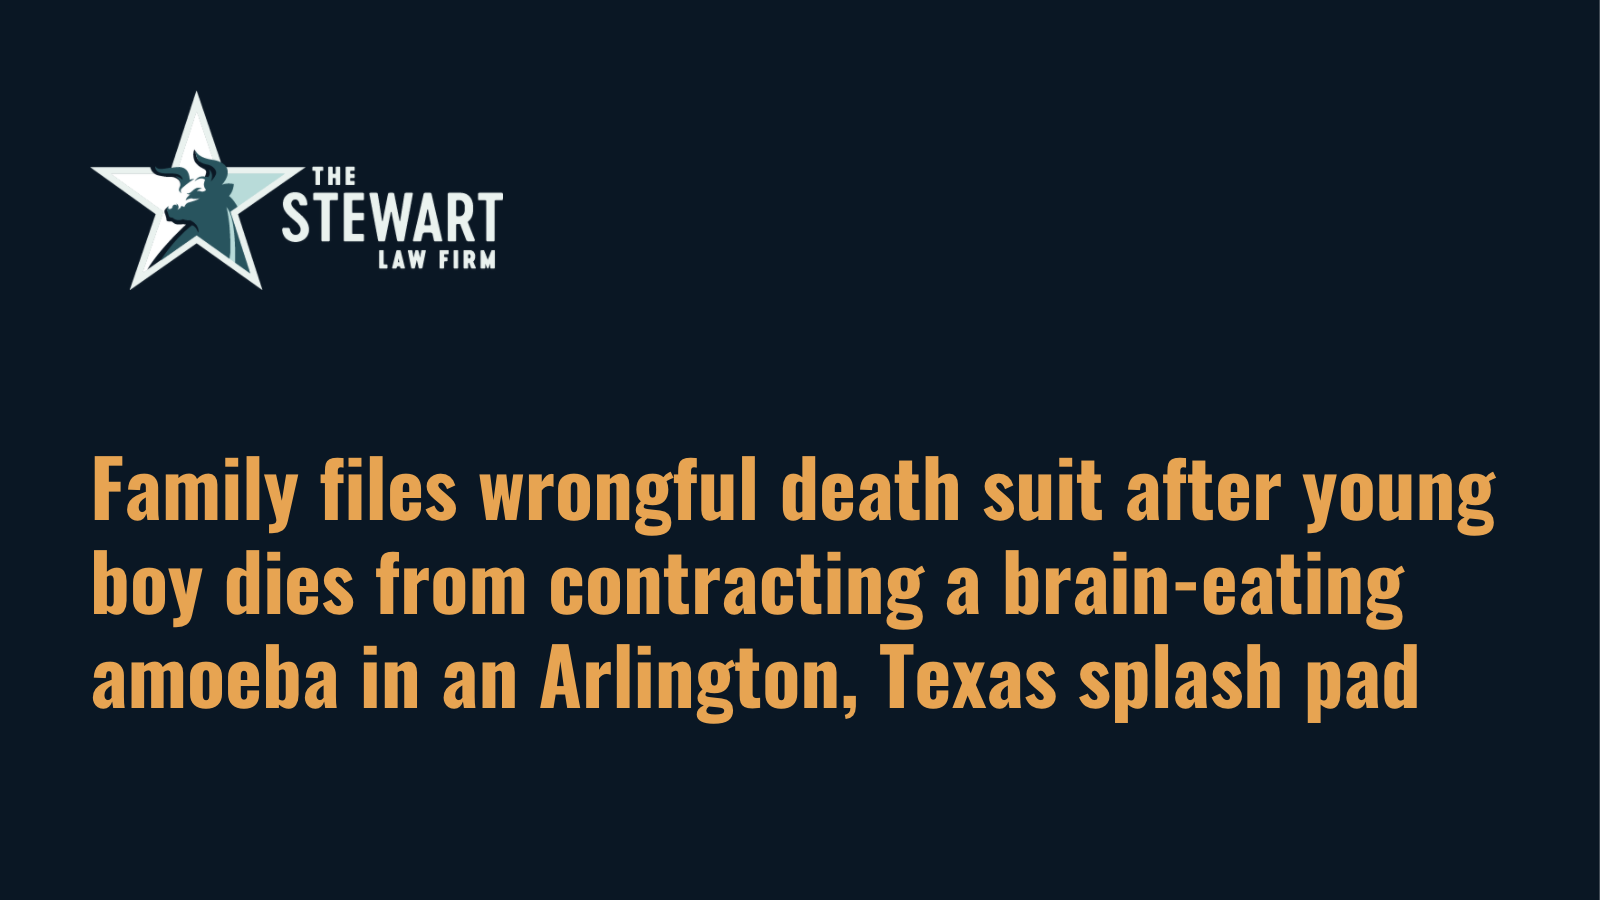 Family files wrongful death suit after young boy dies from contracting a brain-eating amoeba in an Arlington Texas splash pad - the stewart law firm - austin texas personal injury lawyer